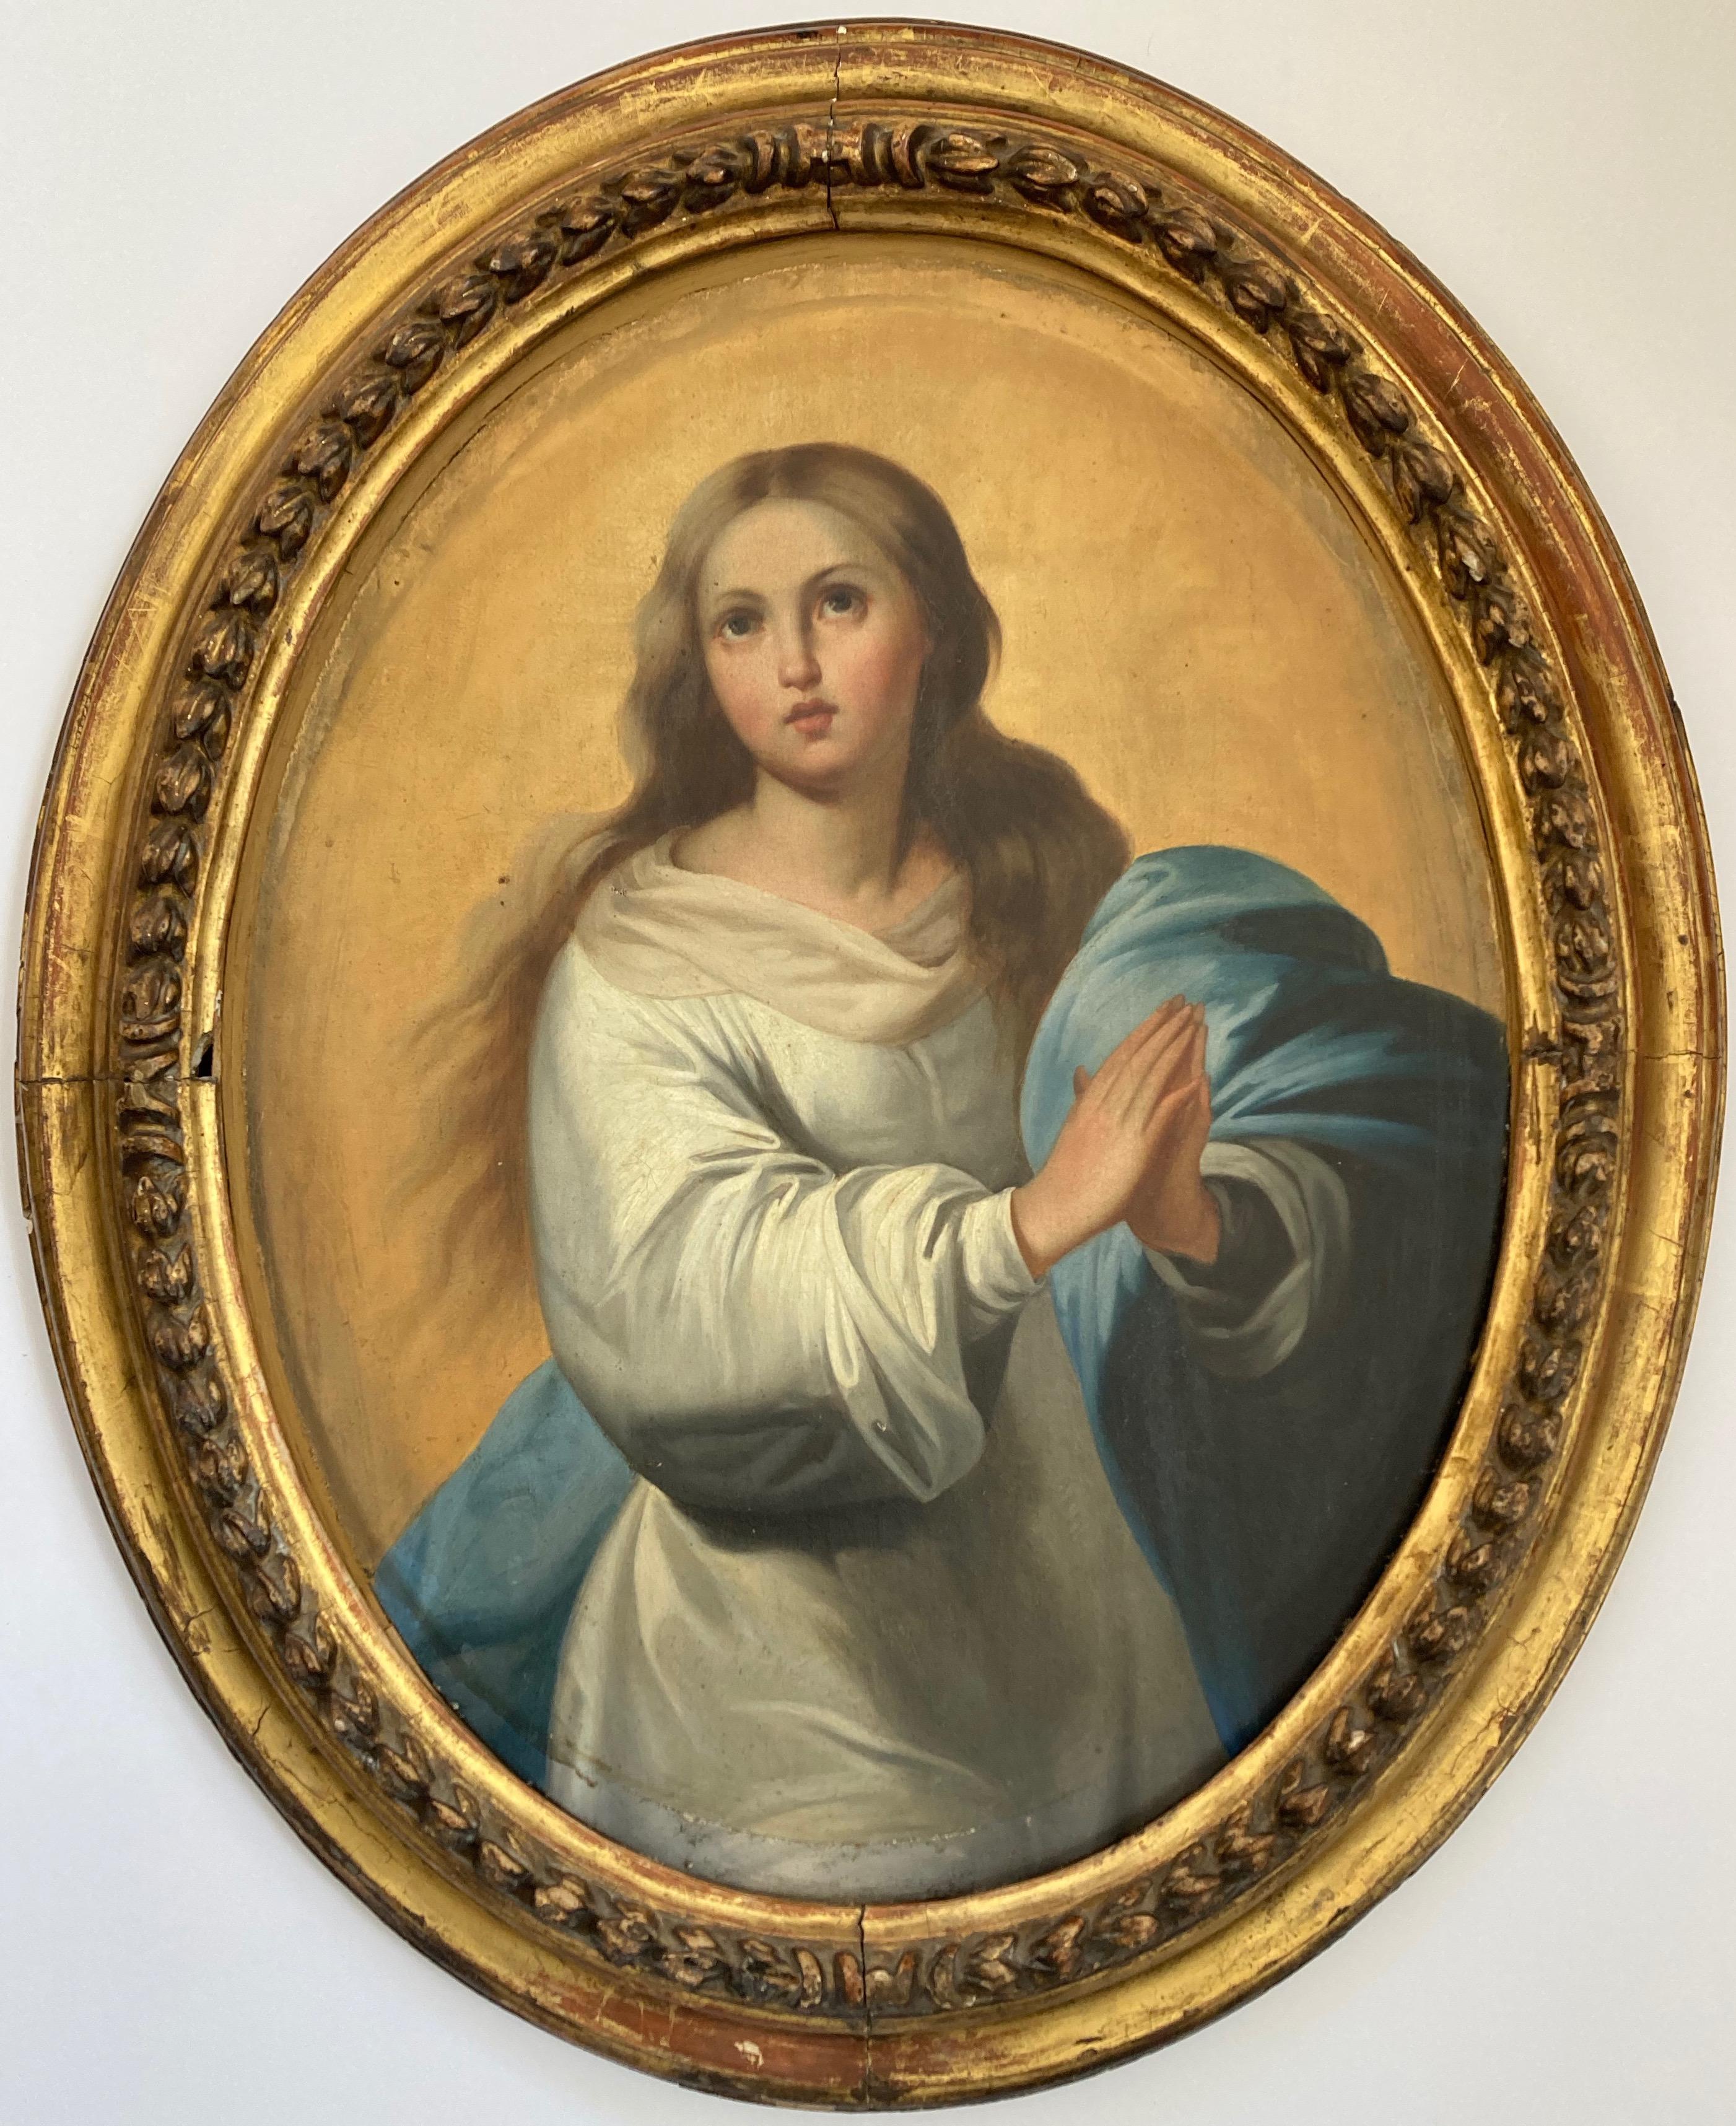 (After) Bartolomé Esteban Murillo Figurative Painting - After Bartolome Murillo, The Immaculate Conception of Virgin Mary, Old Master